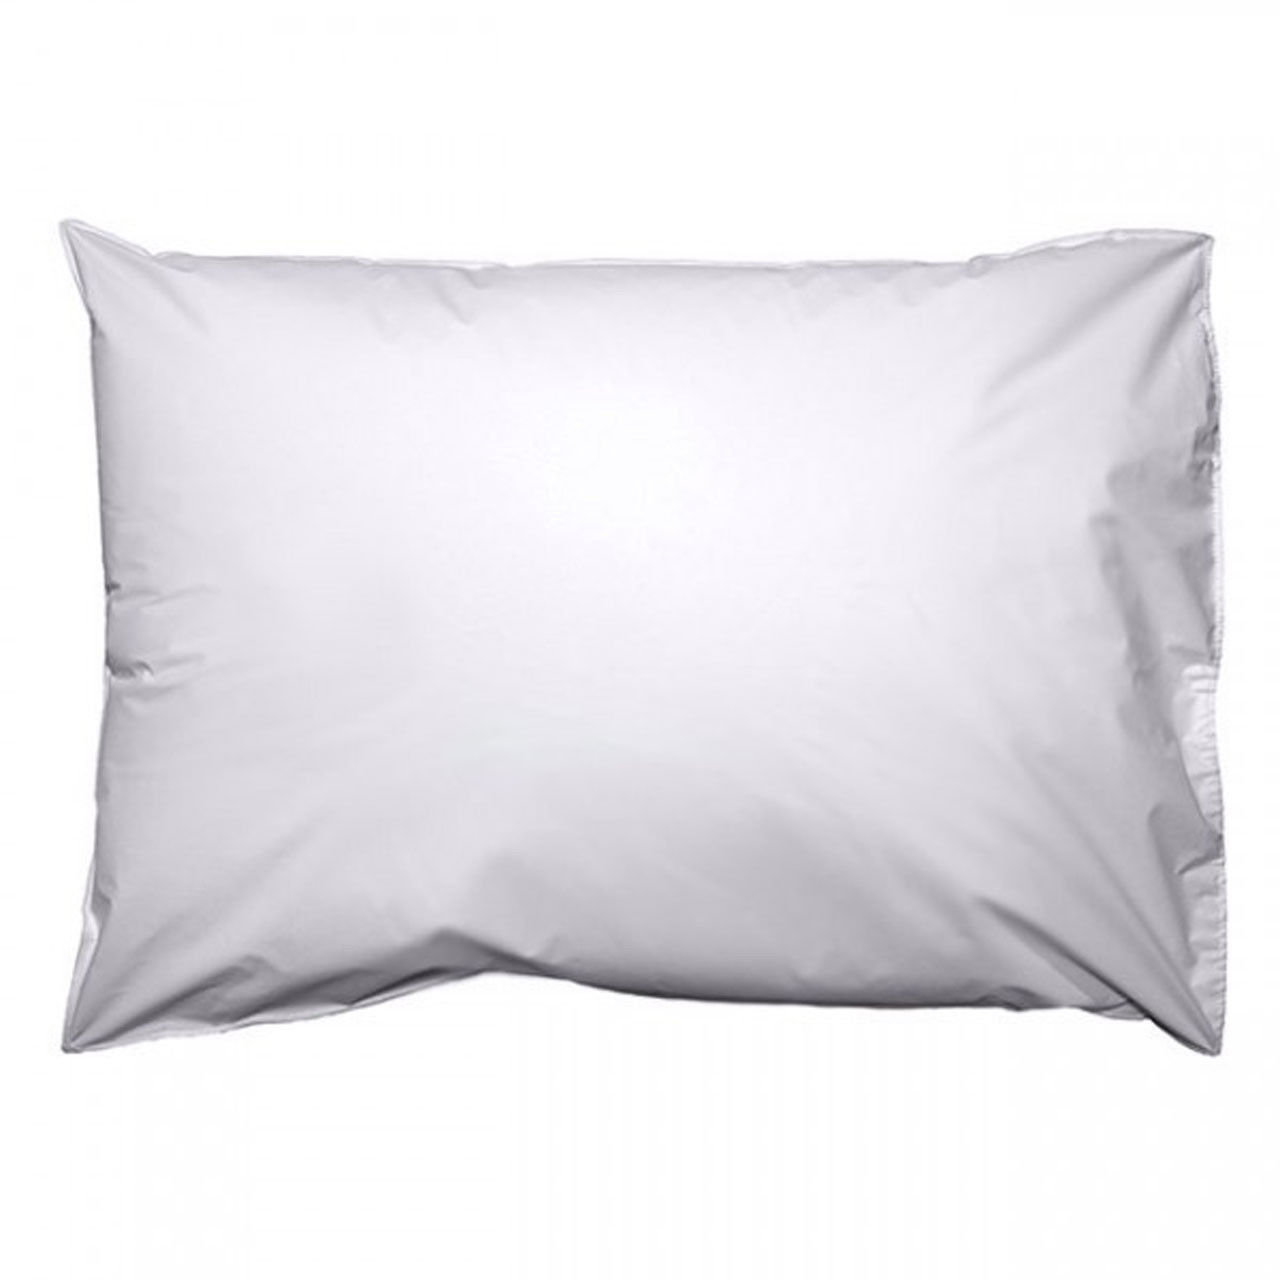 Wipeable Pillows Questions & Answers